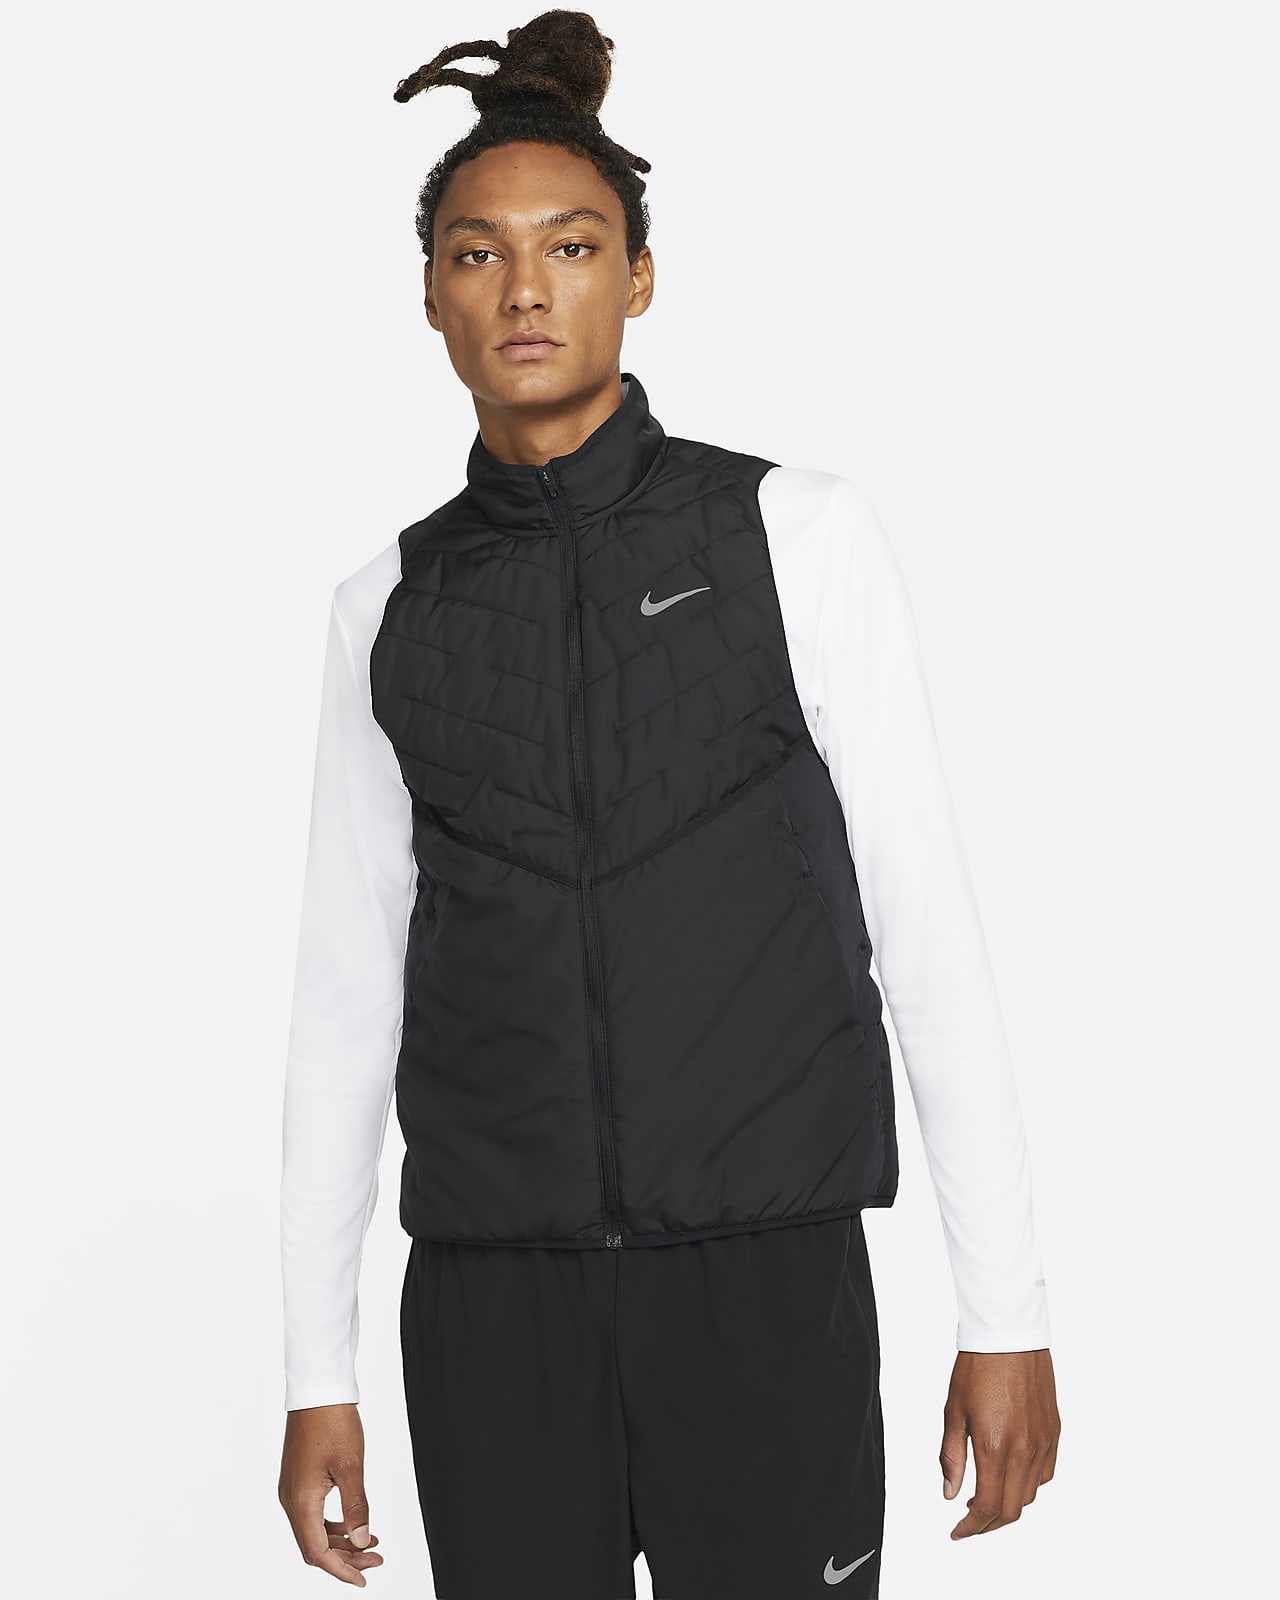 Nike Therma-FIT Repel Herren-Laufweste mit Synthetikfüllung